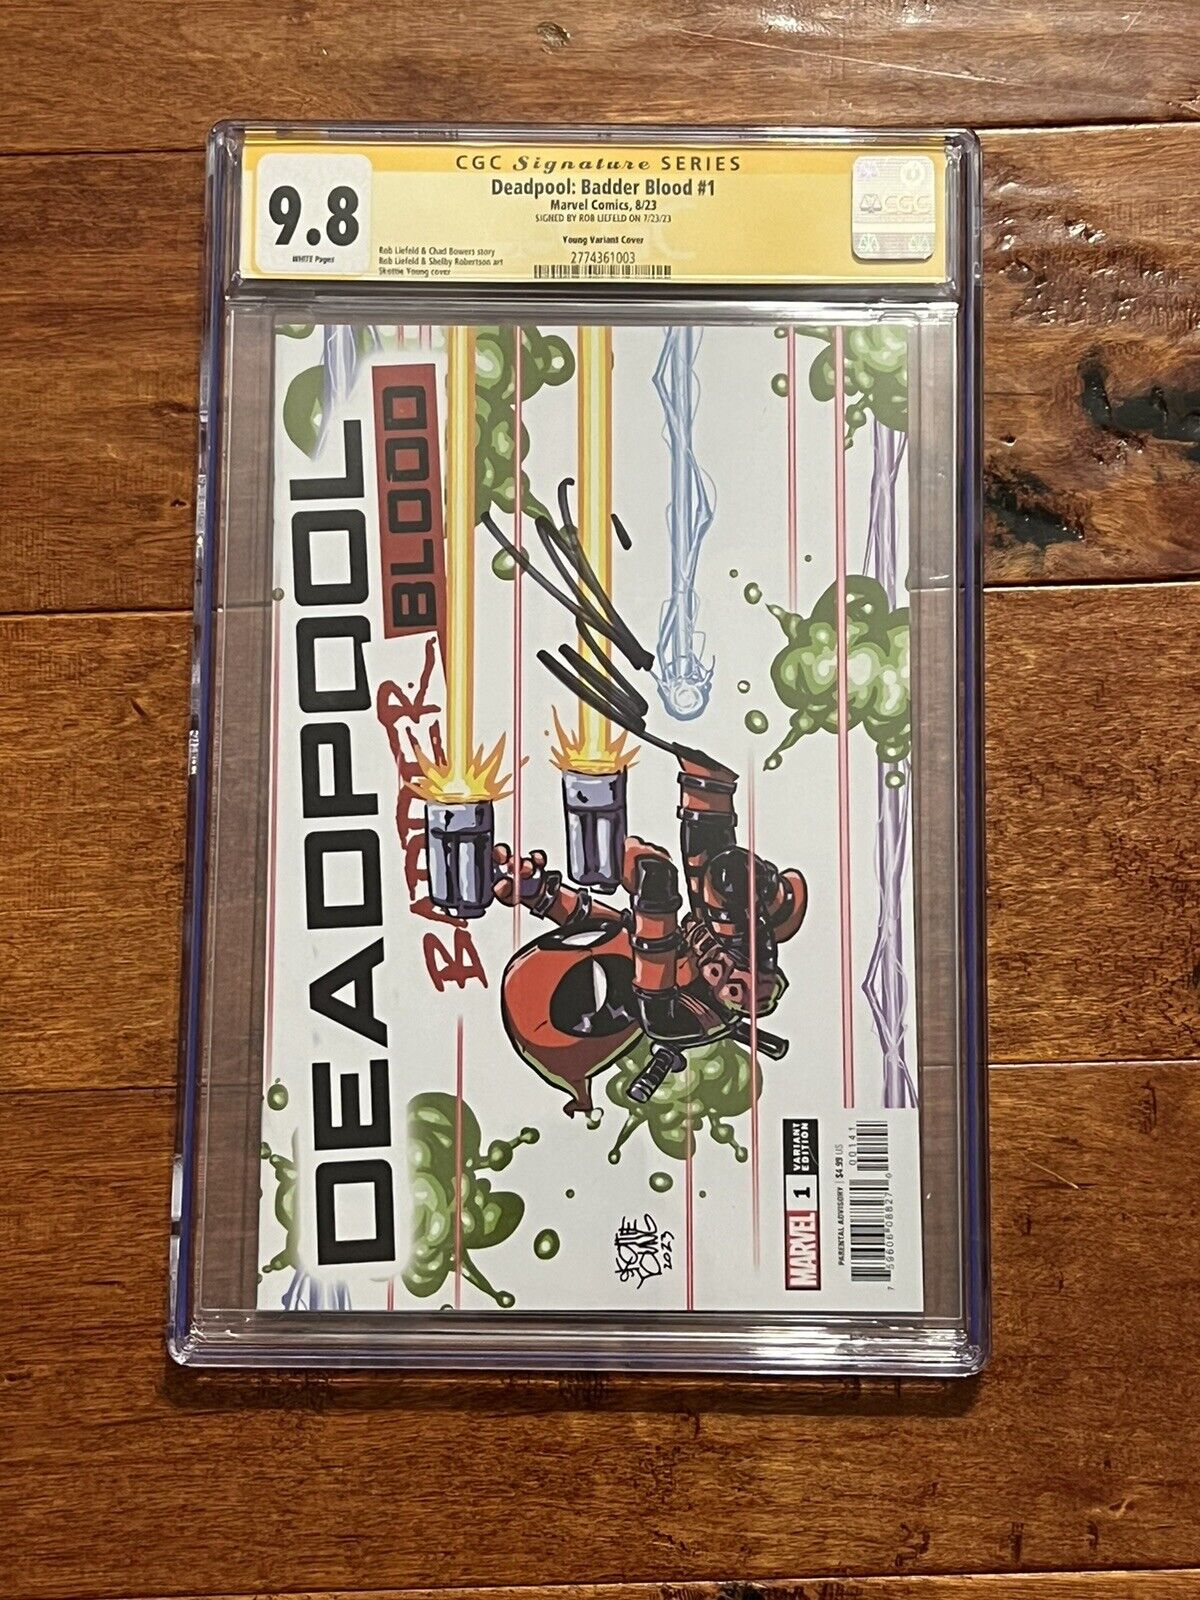 Deadpool: Badder Blood #1 Skottie Young Variant CGC 9.8 SS SIGNED BY ROB LIEFELD